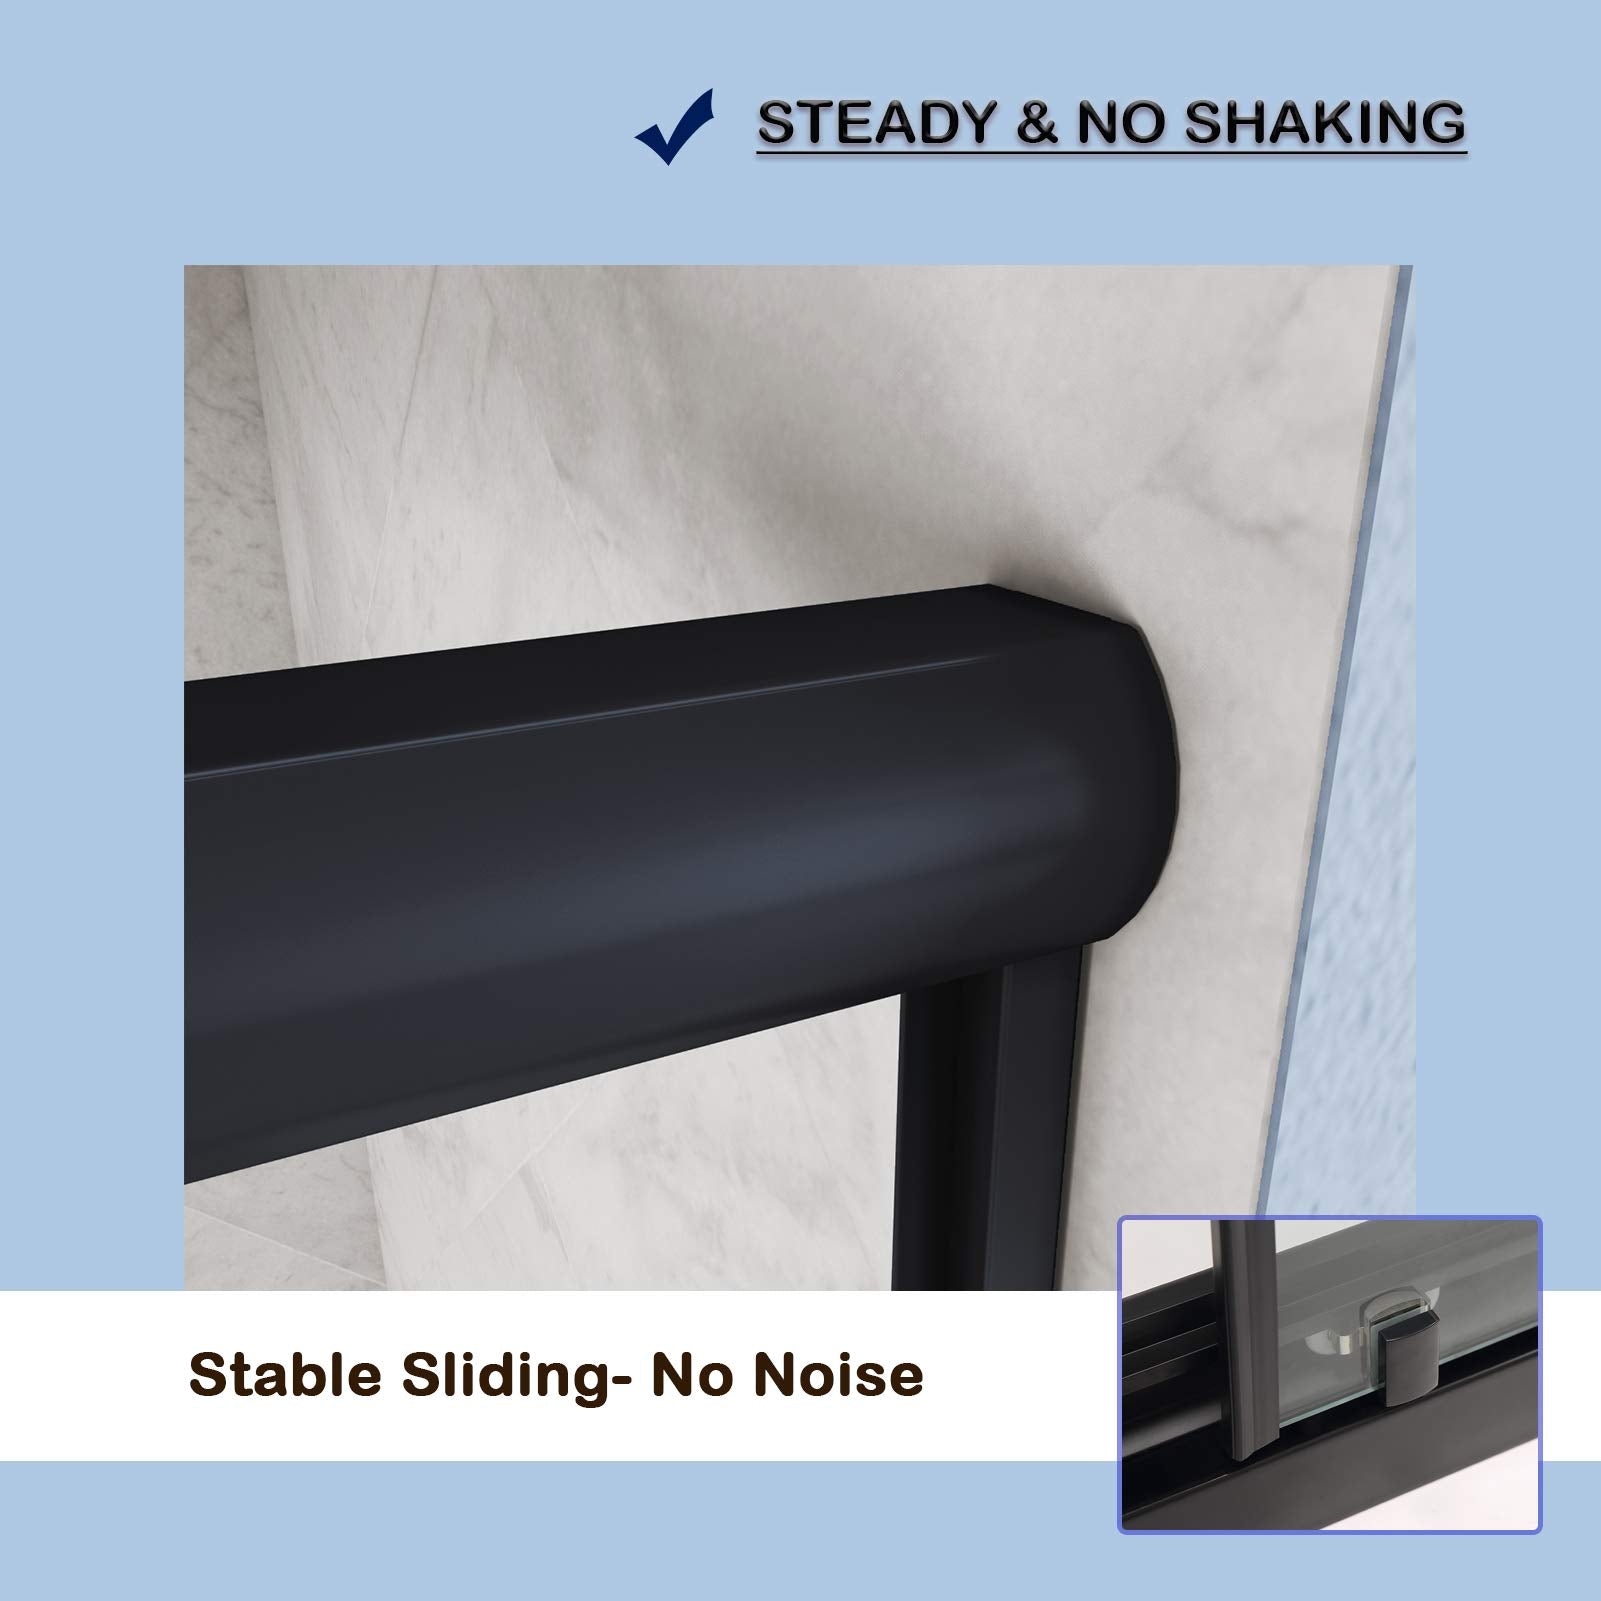 steady no shaking（stable sliding--no noise）